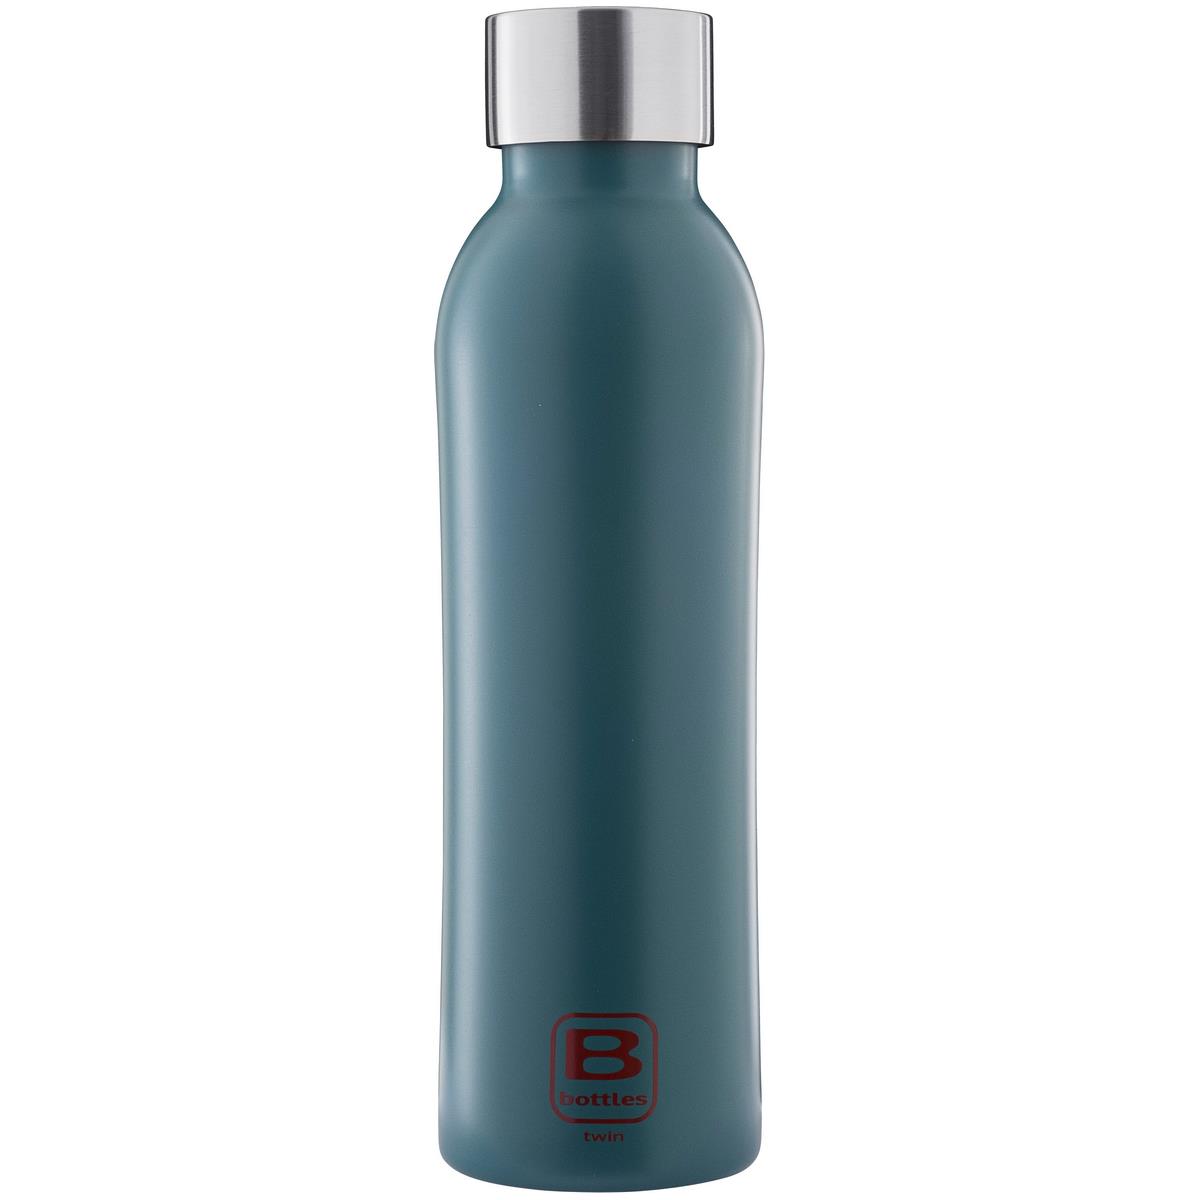 photo B Bottles Twin - Teal Blue - 500 ml - Double wall thermal bottle in 18/10 stainless steel